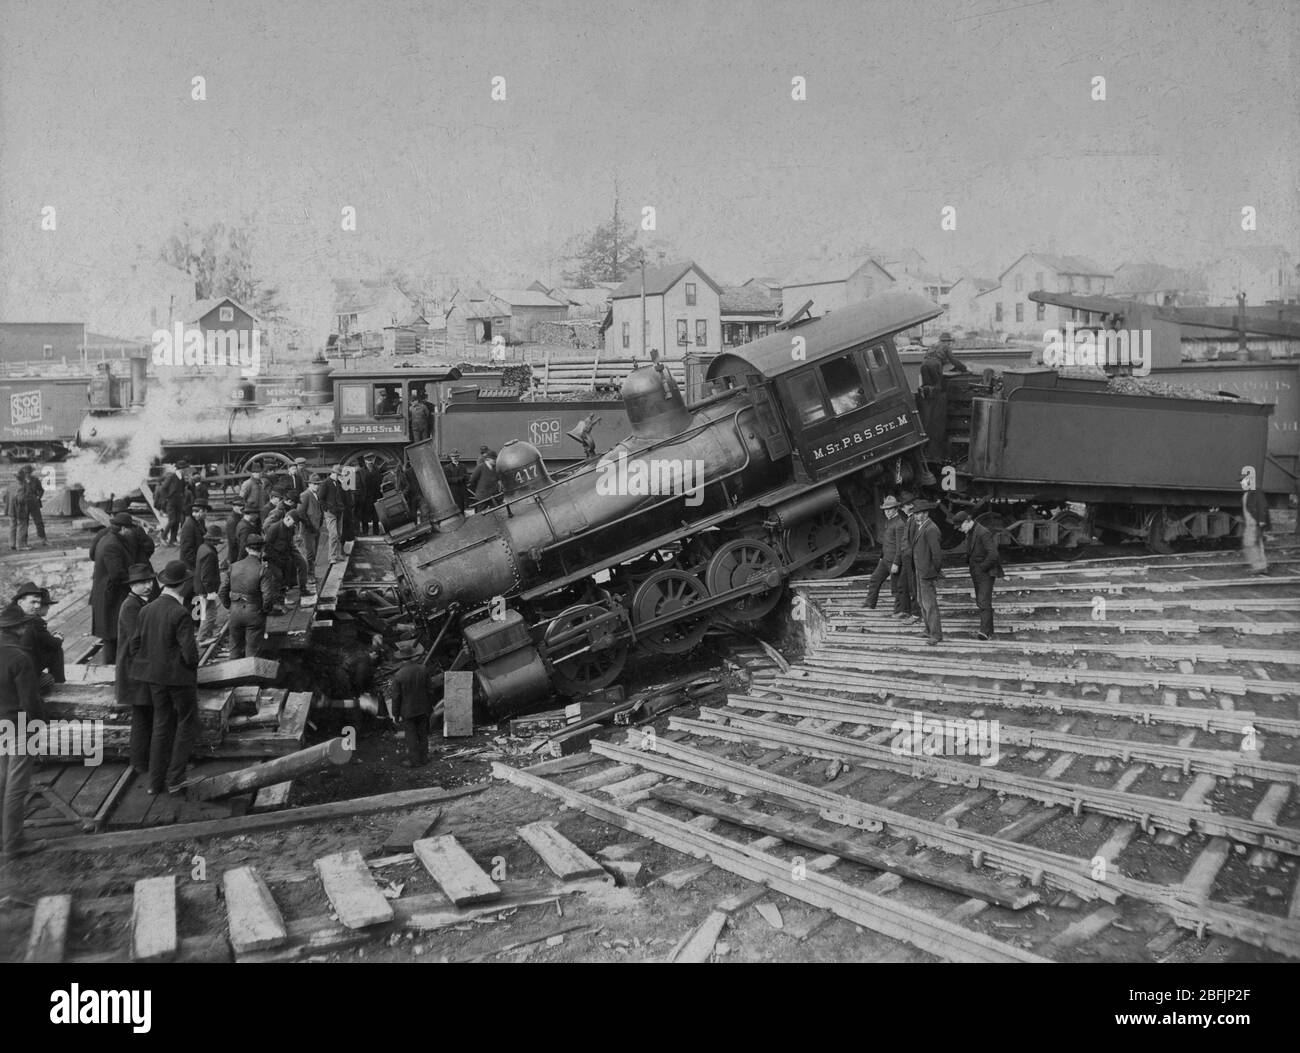 This SOO Line steam train Engine 417 crashed into the round house's turntable. The SOO Line was owned by the Canadian Pacific Railway, as of 1888. This accident may have occurred in Ladysmith, Wis. USA    To see my related vintage images, Search:  Prestor  vintage  vehicle Stock Photo